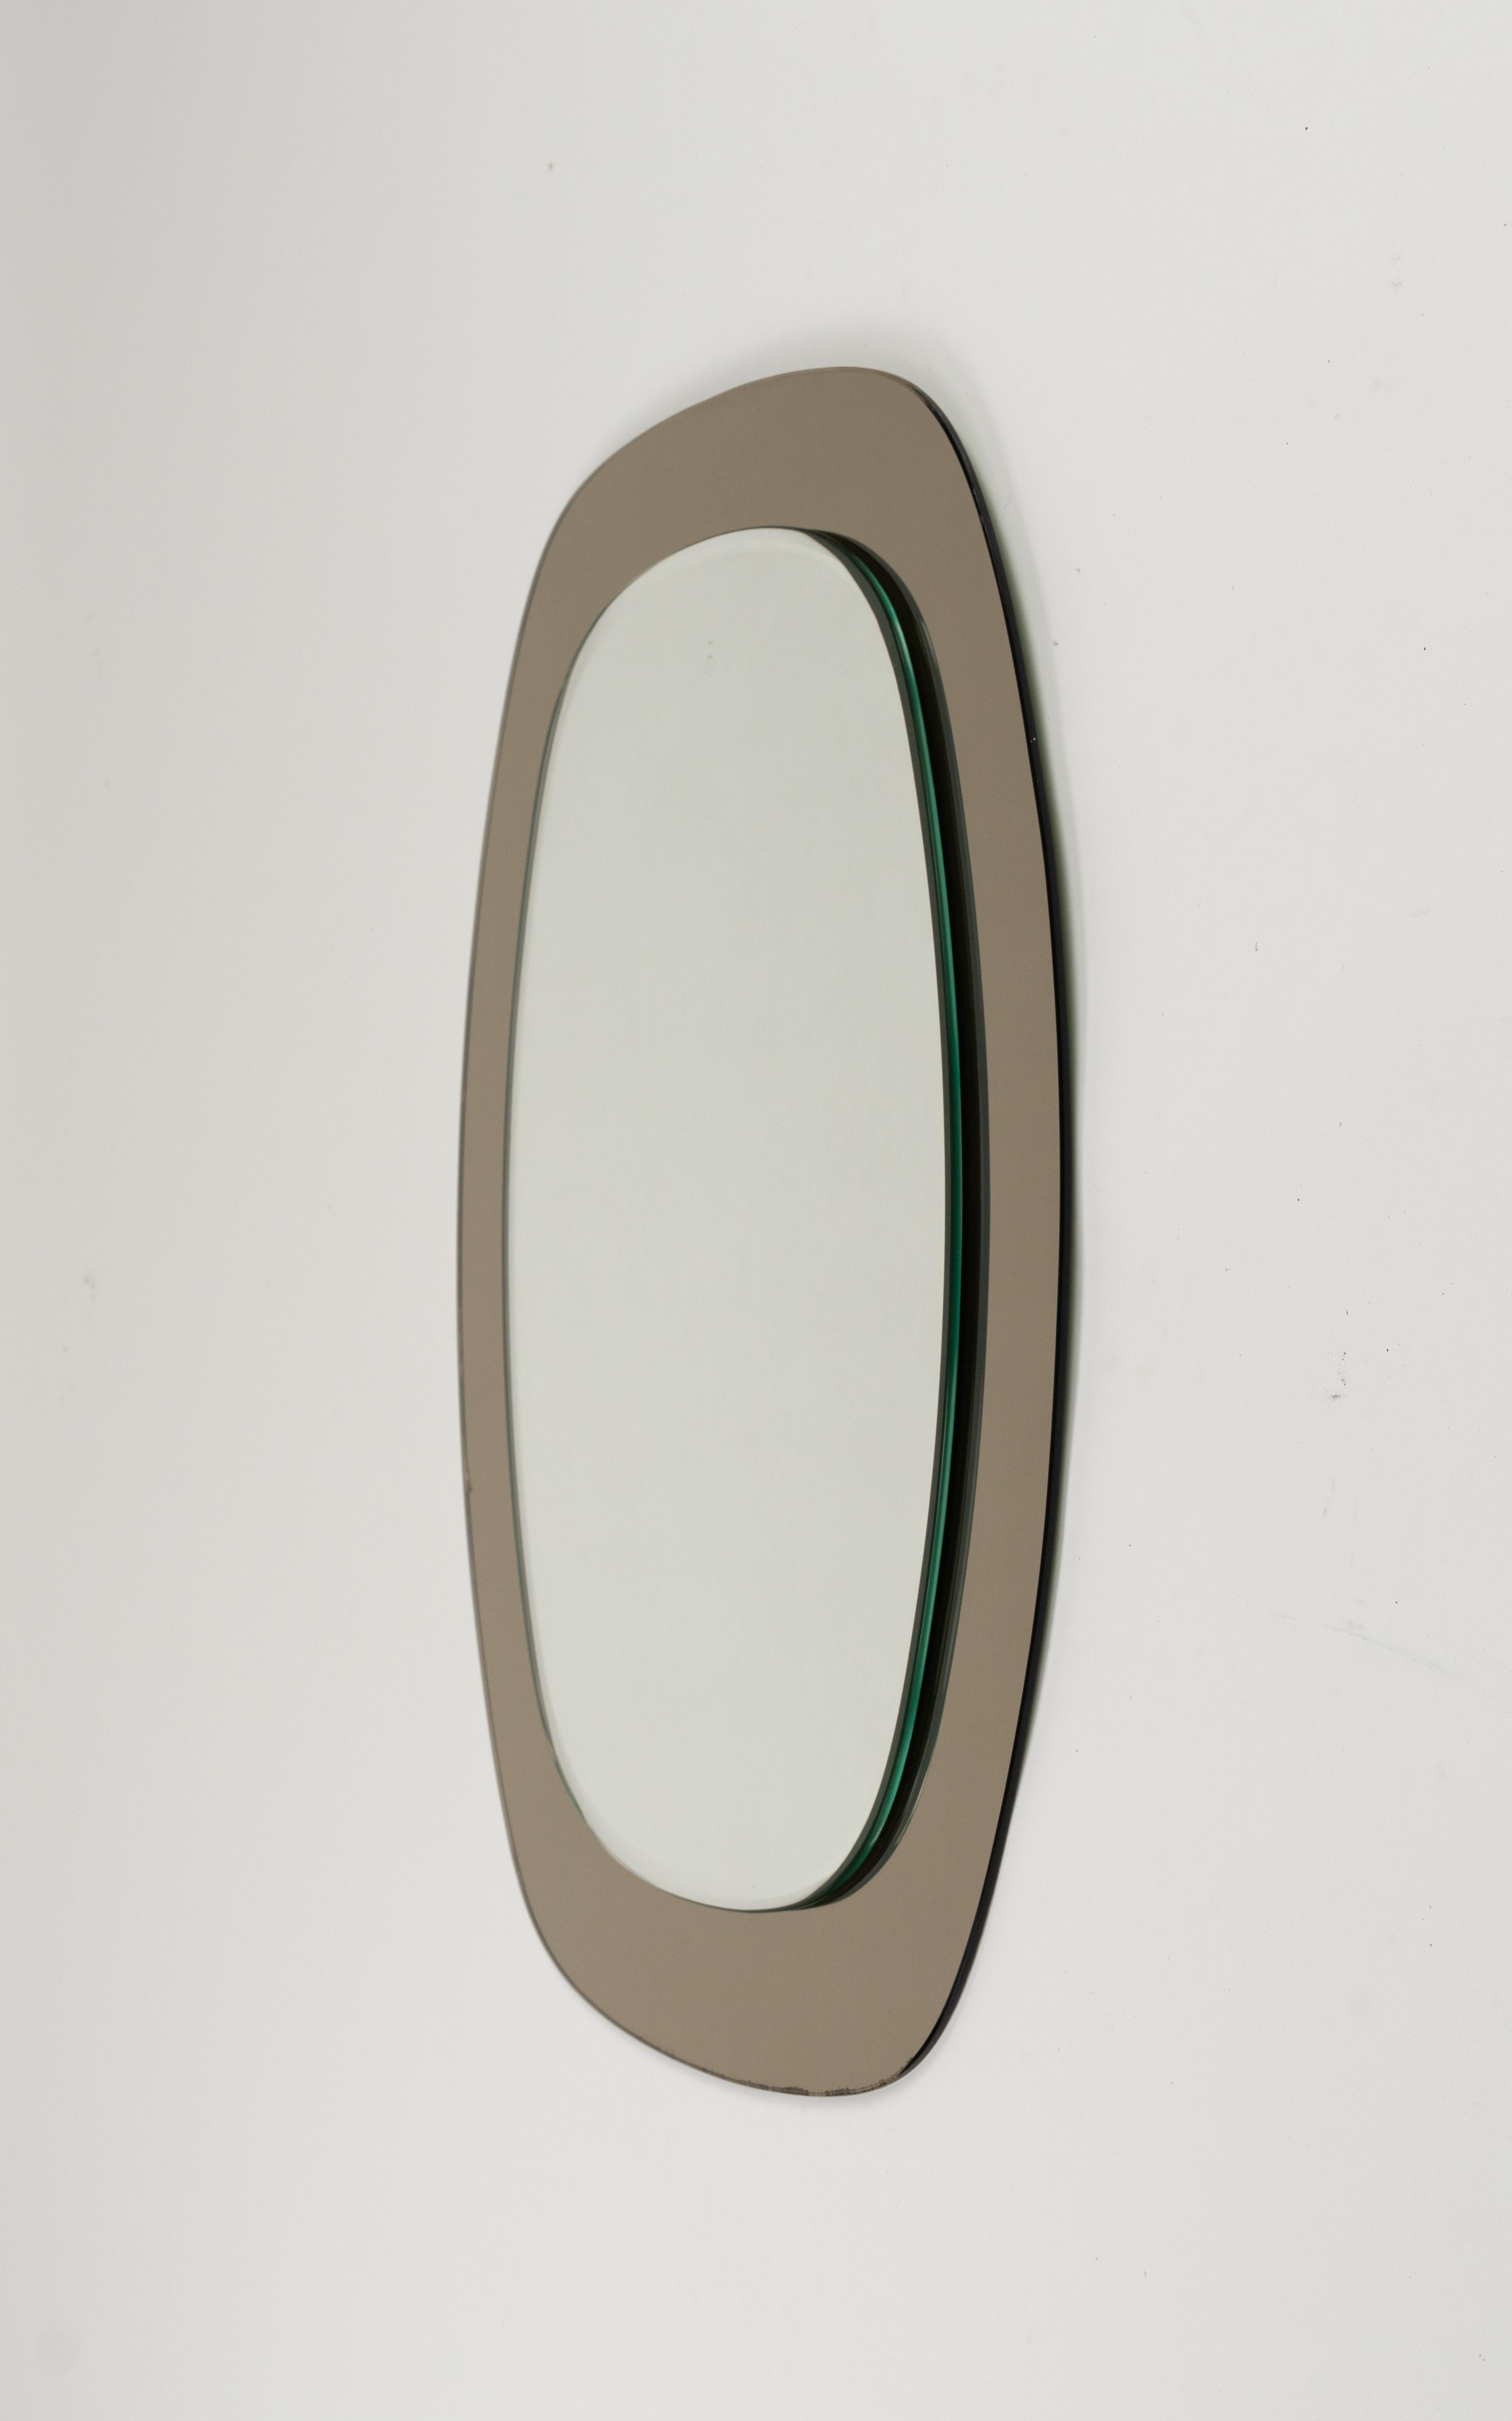 Midcentury Cristal Art Oval Wall Mirror with Smoked Frame, Italy 1960s For Sale 3